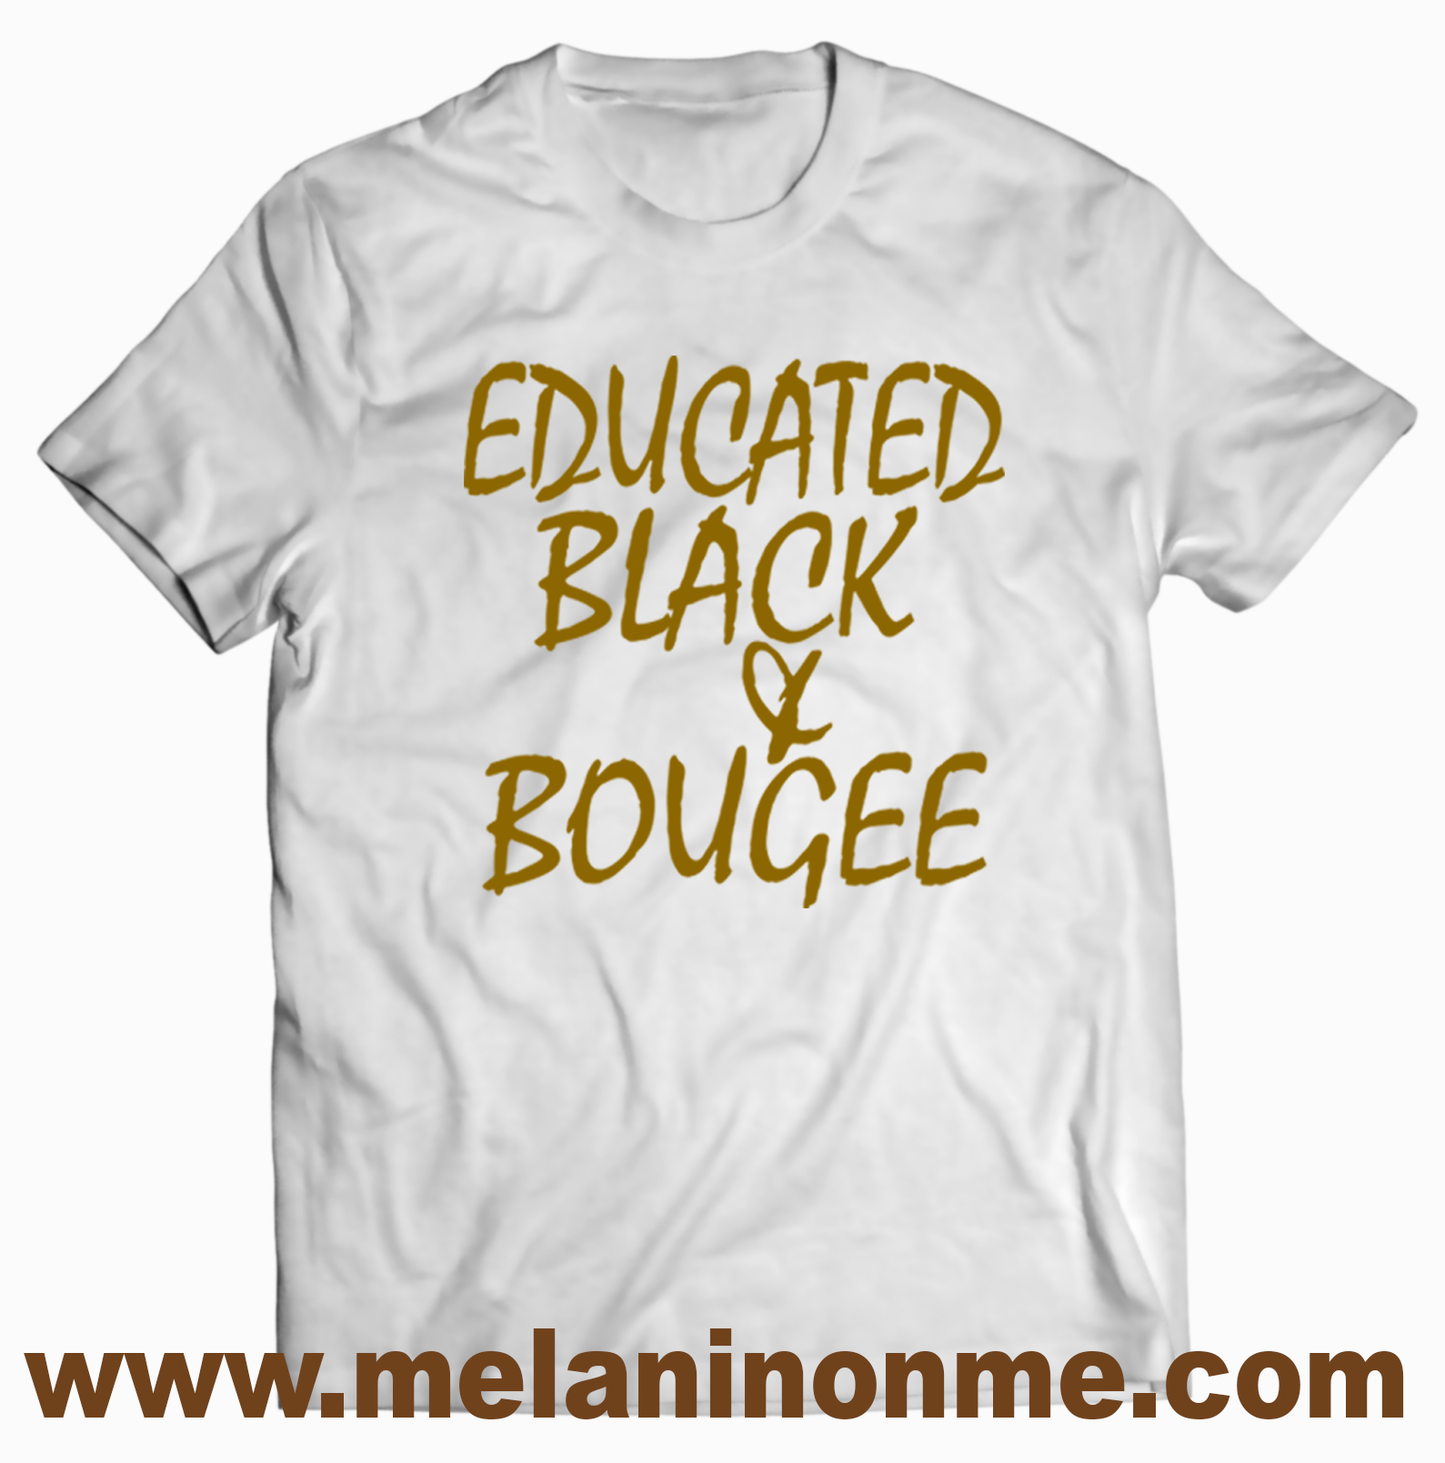 Educated Black and Bougee Tshirt - Unisex